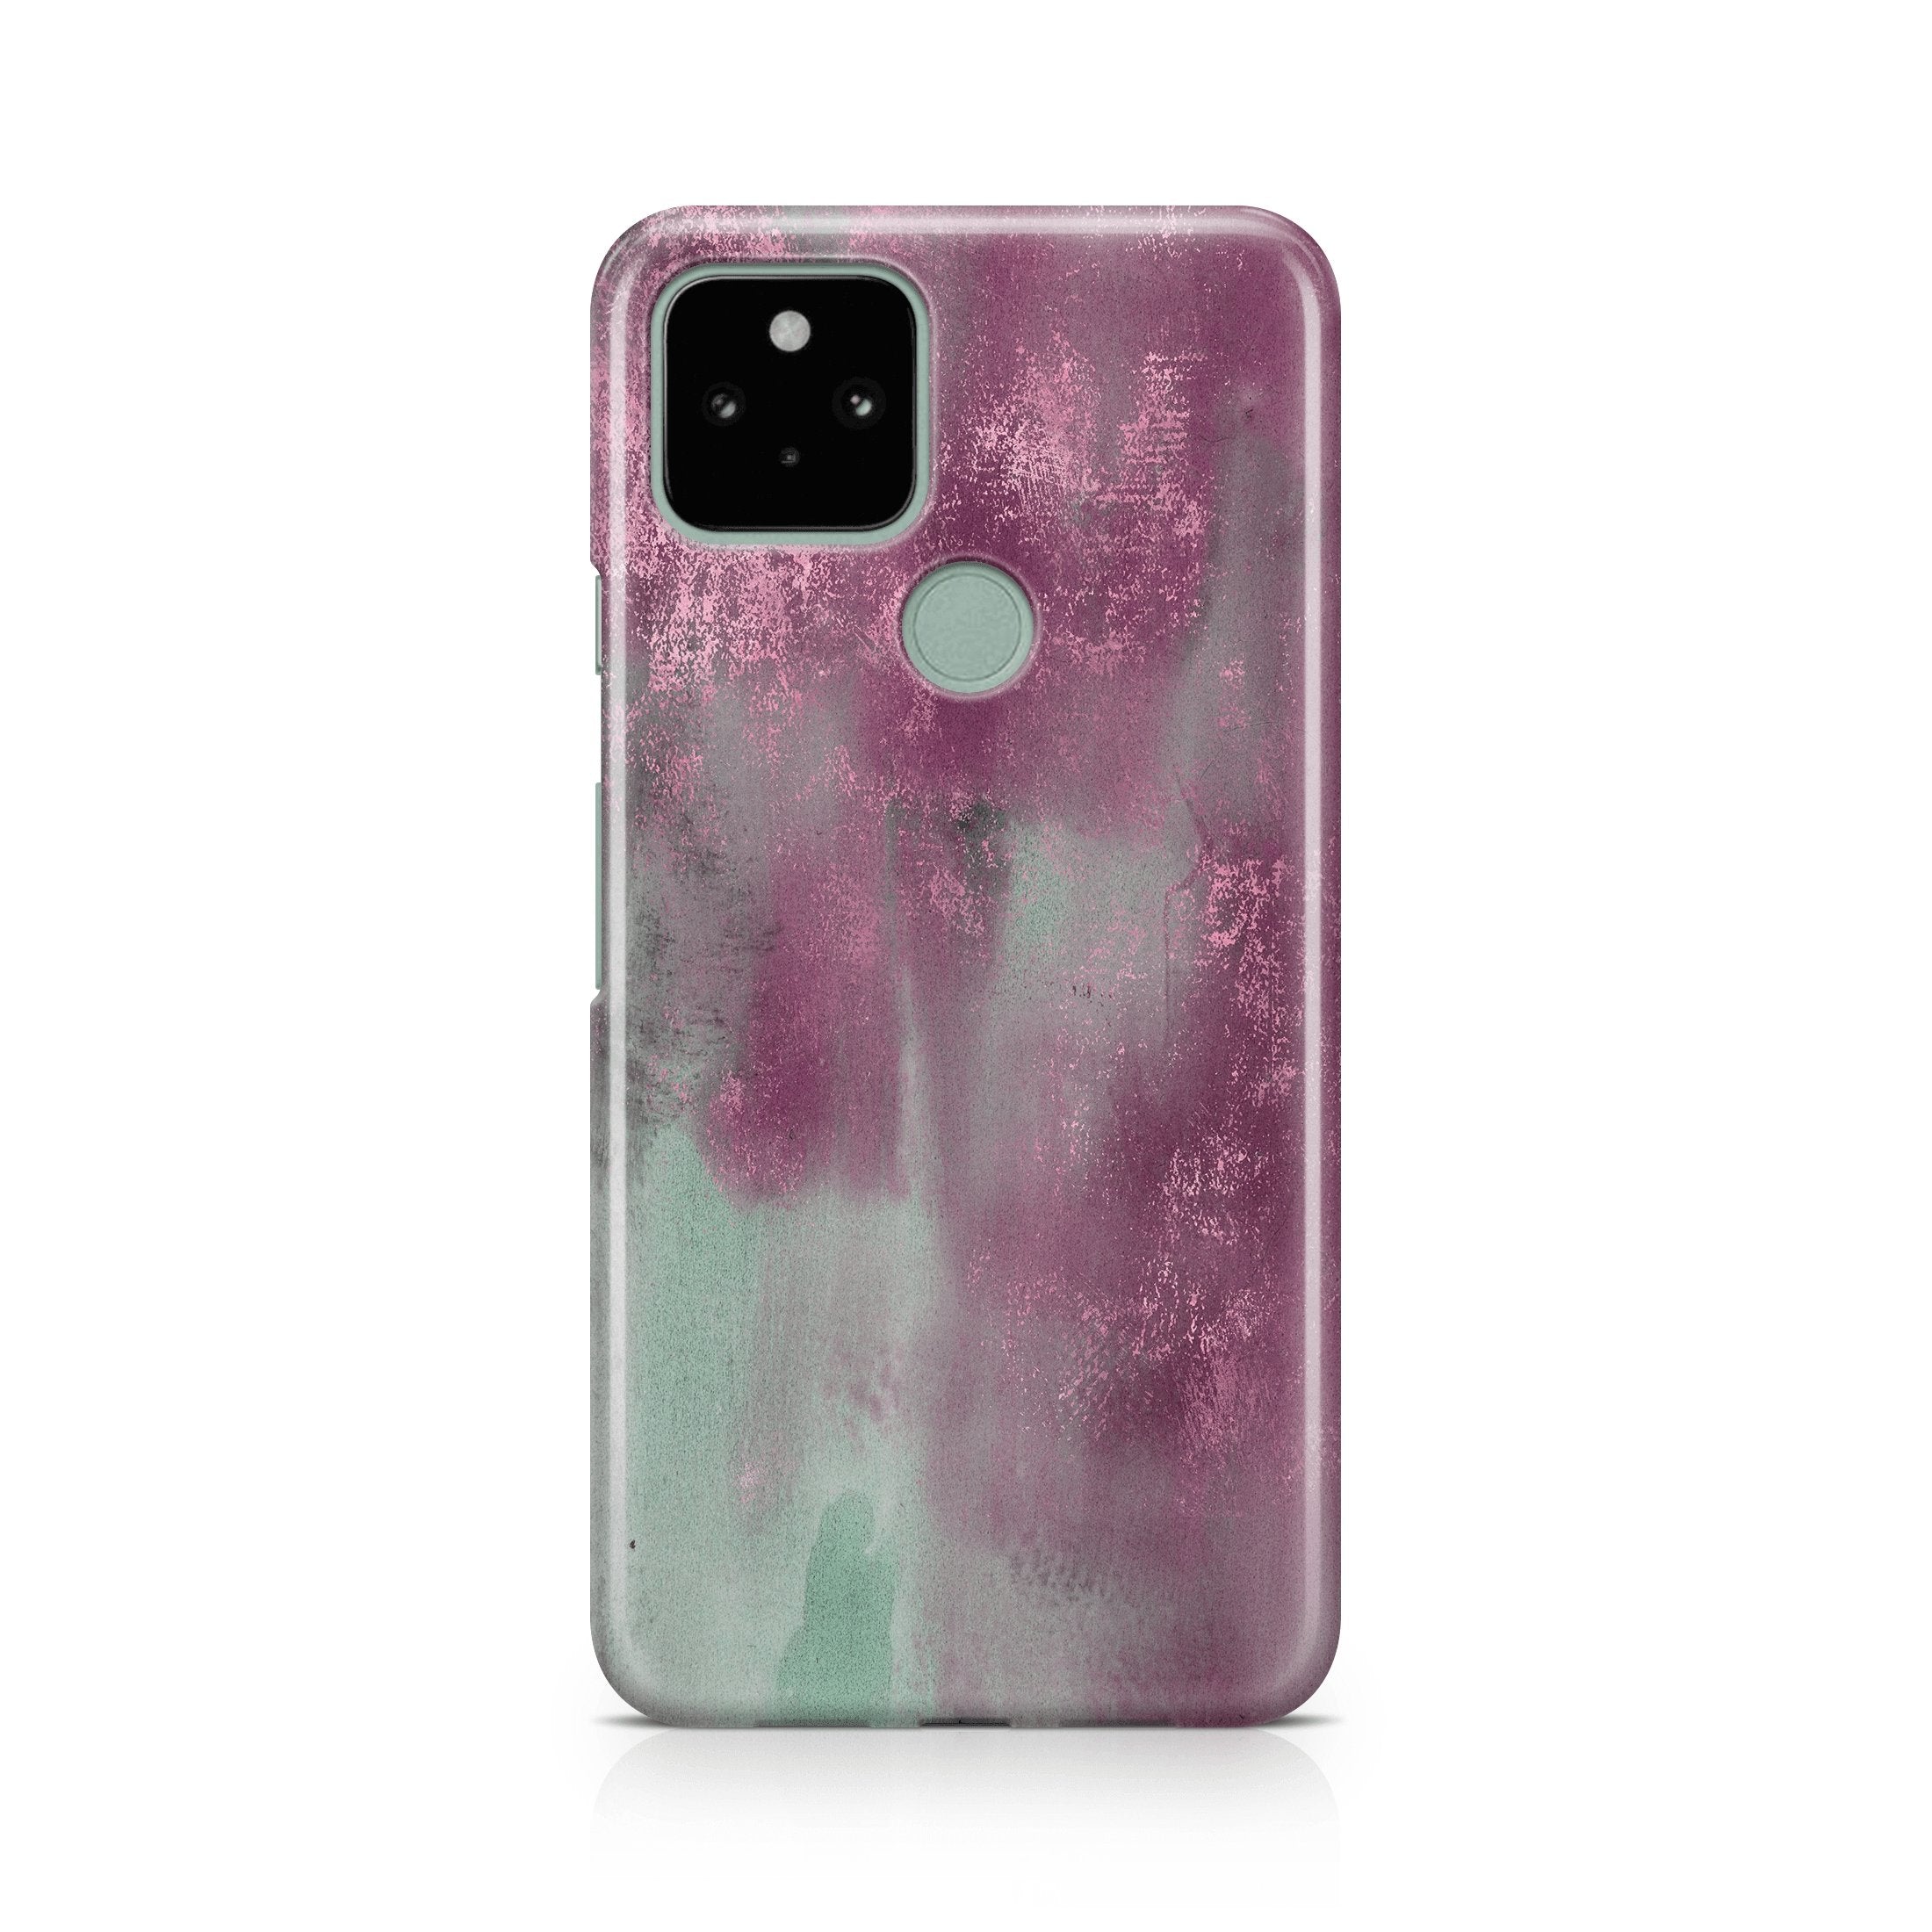 Rustic Rose I - Google phone case designs by CaseSwagger